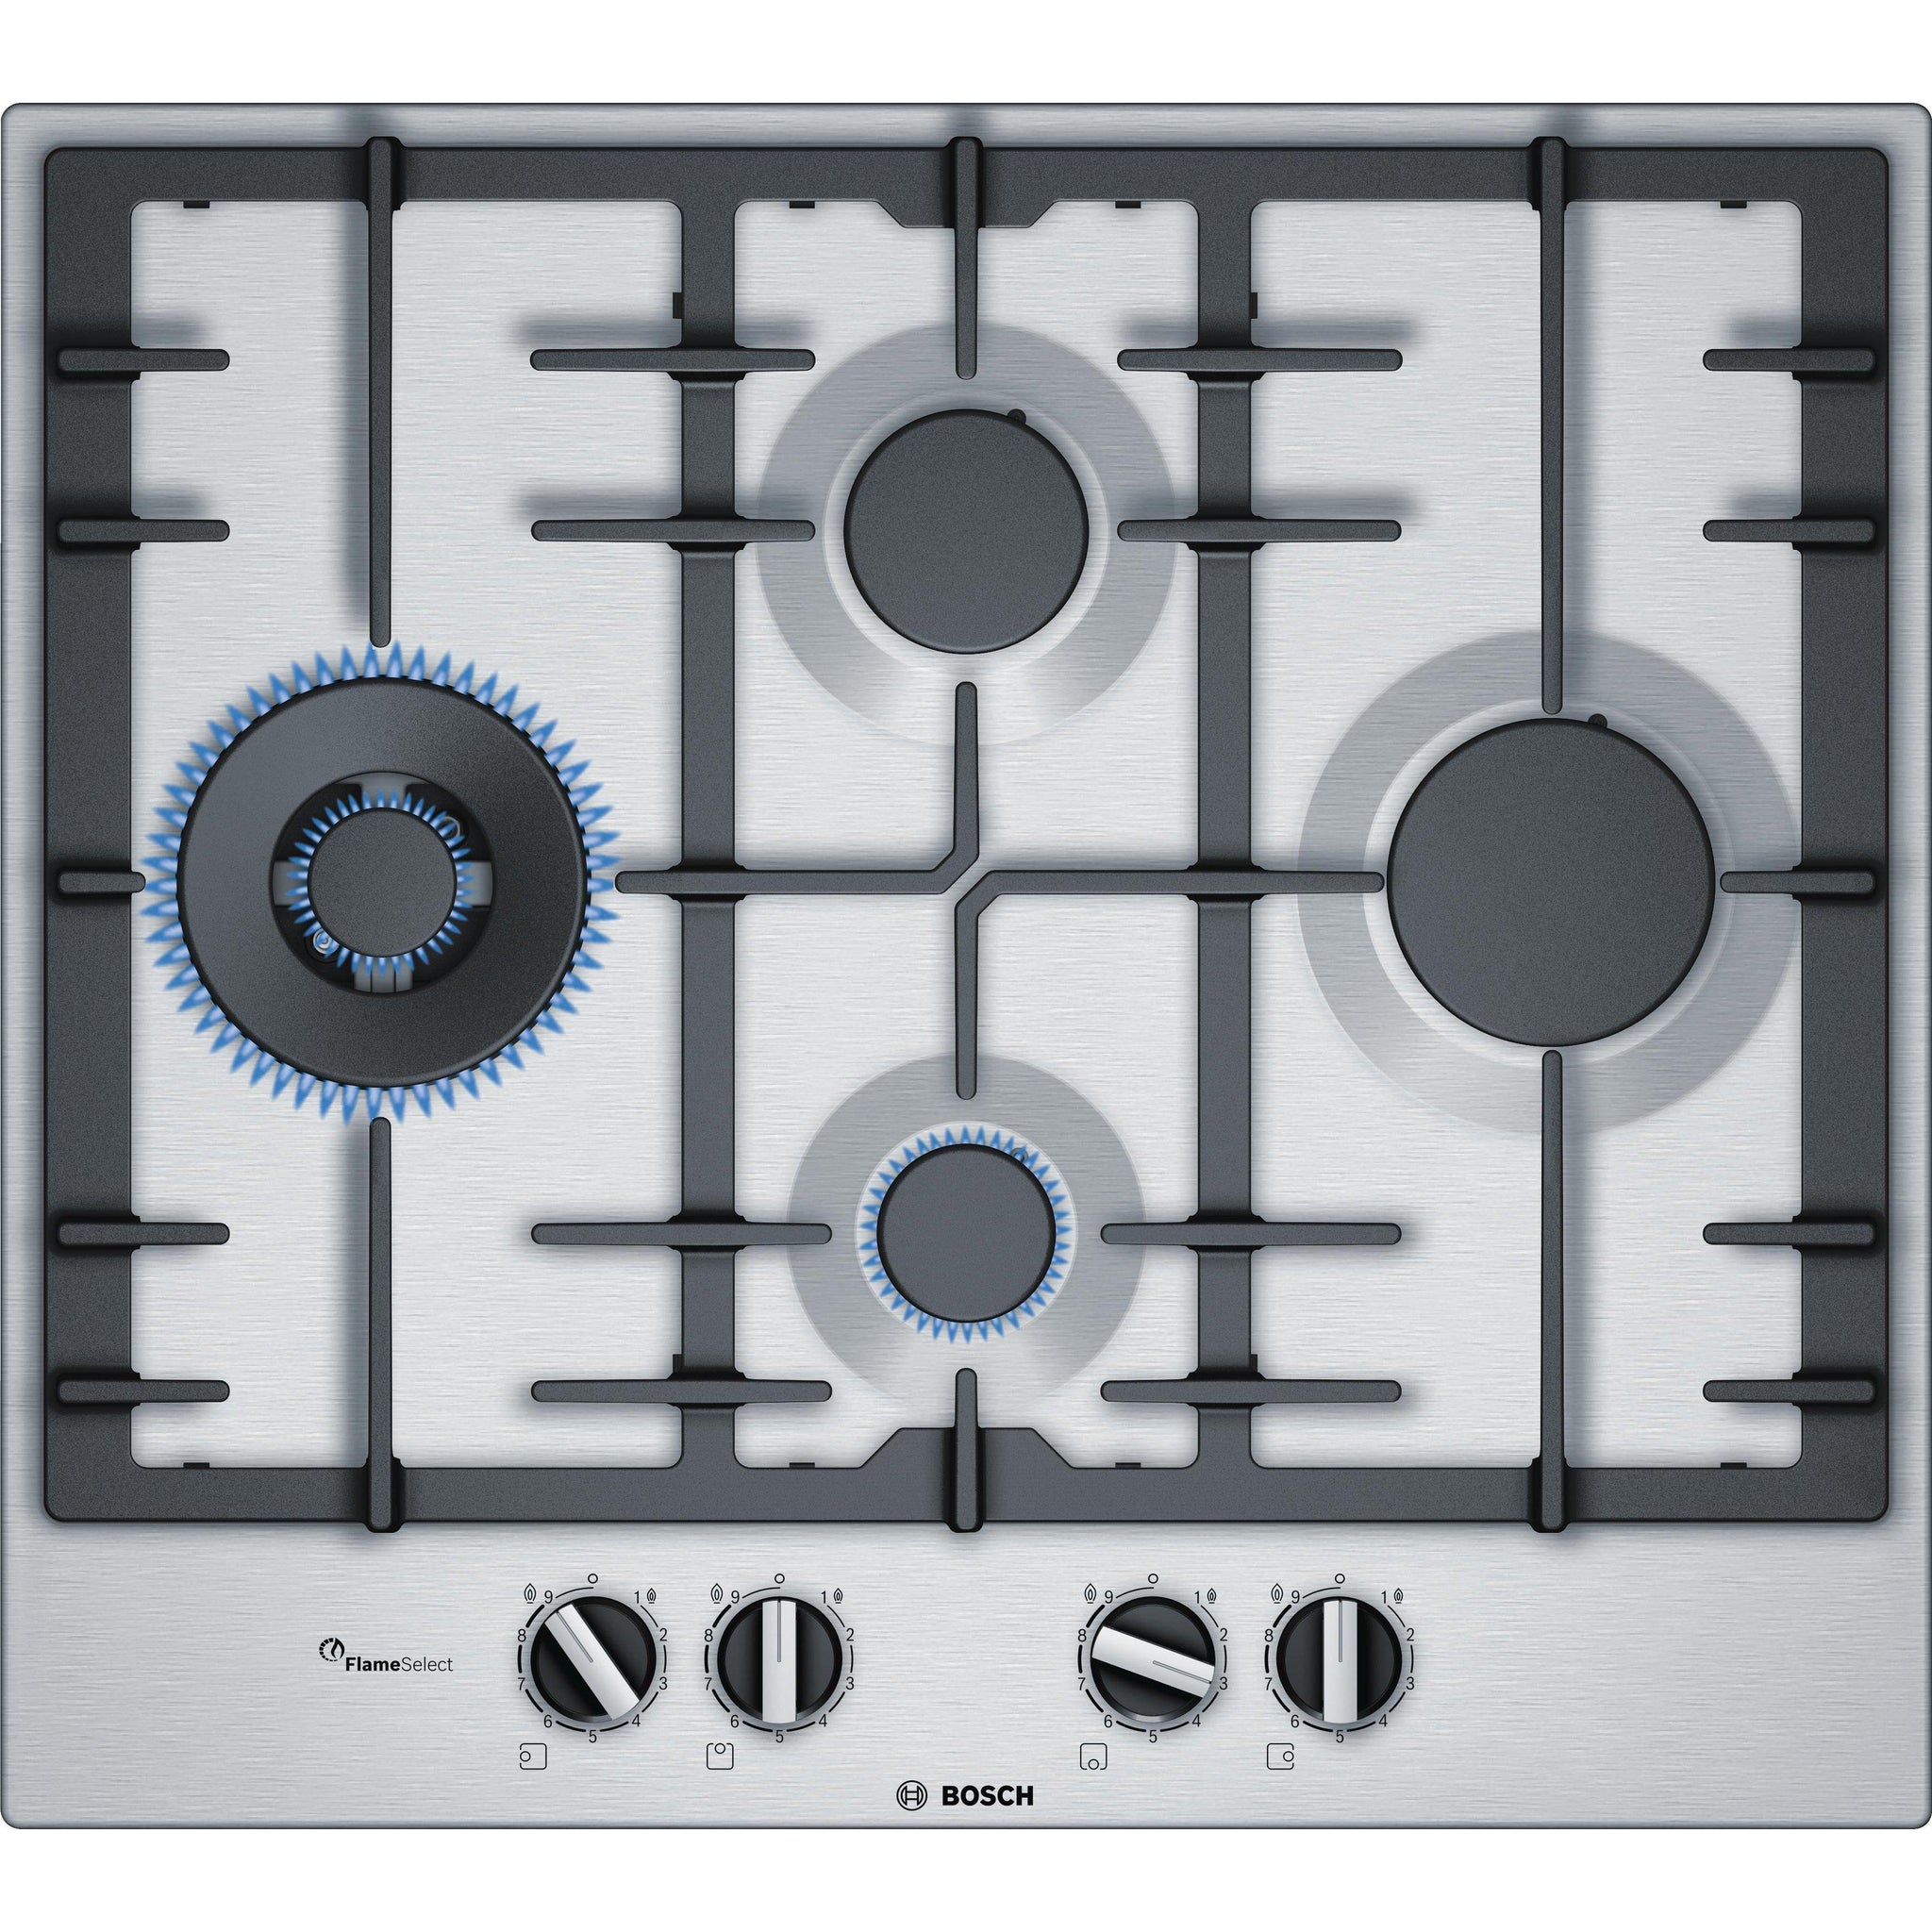 Bosch Serie 6 Pci6a5b90 4 Burner Gas Hob Stainless Steel Delivery Within 710 Days